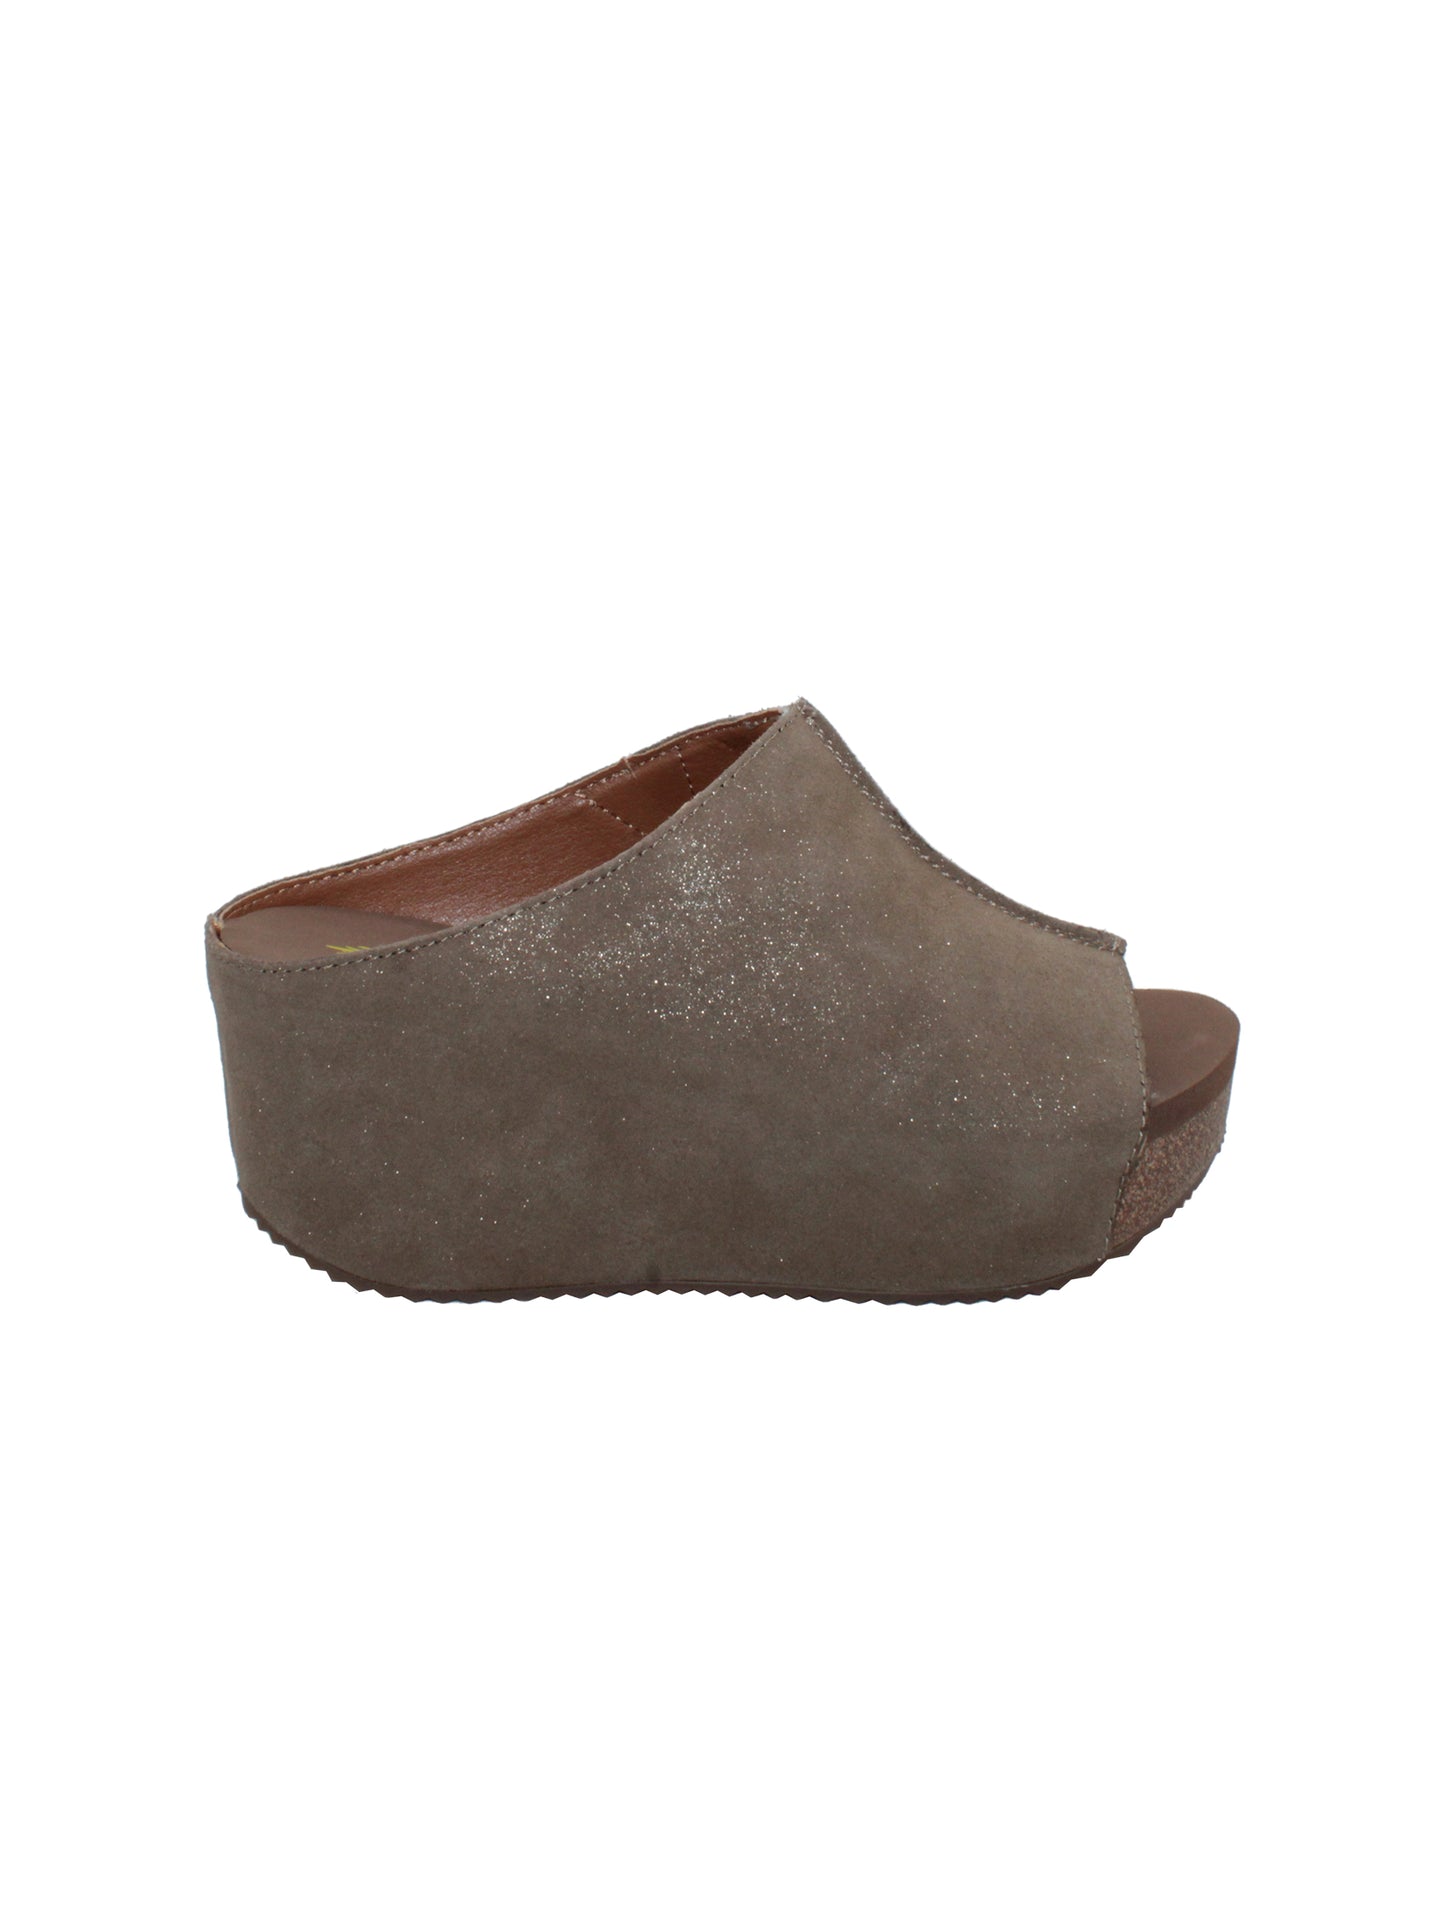 SLIP ON PEEP TOE WEDGE - Suede, hair calf, metallic tonal camo, faux snake upper with butted center seam and inner elastic gore for perfect fit - Slip on design - Leather lining - Signature ultra comfort EVA insole - Rubber traction outsole - Approx. 0.75" platform height - Approx. 2.75" wedge heel height bronze